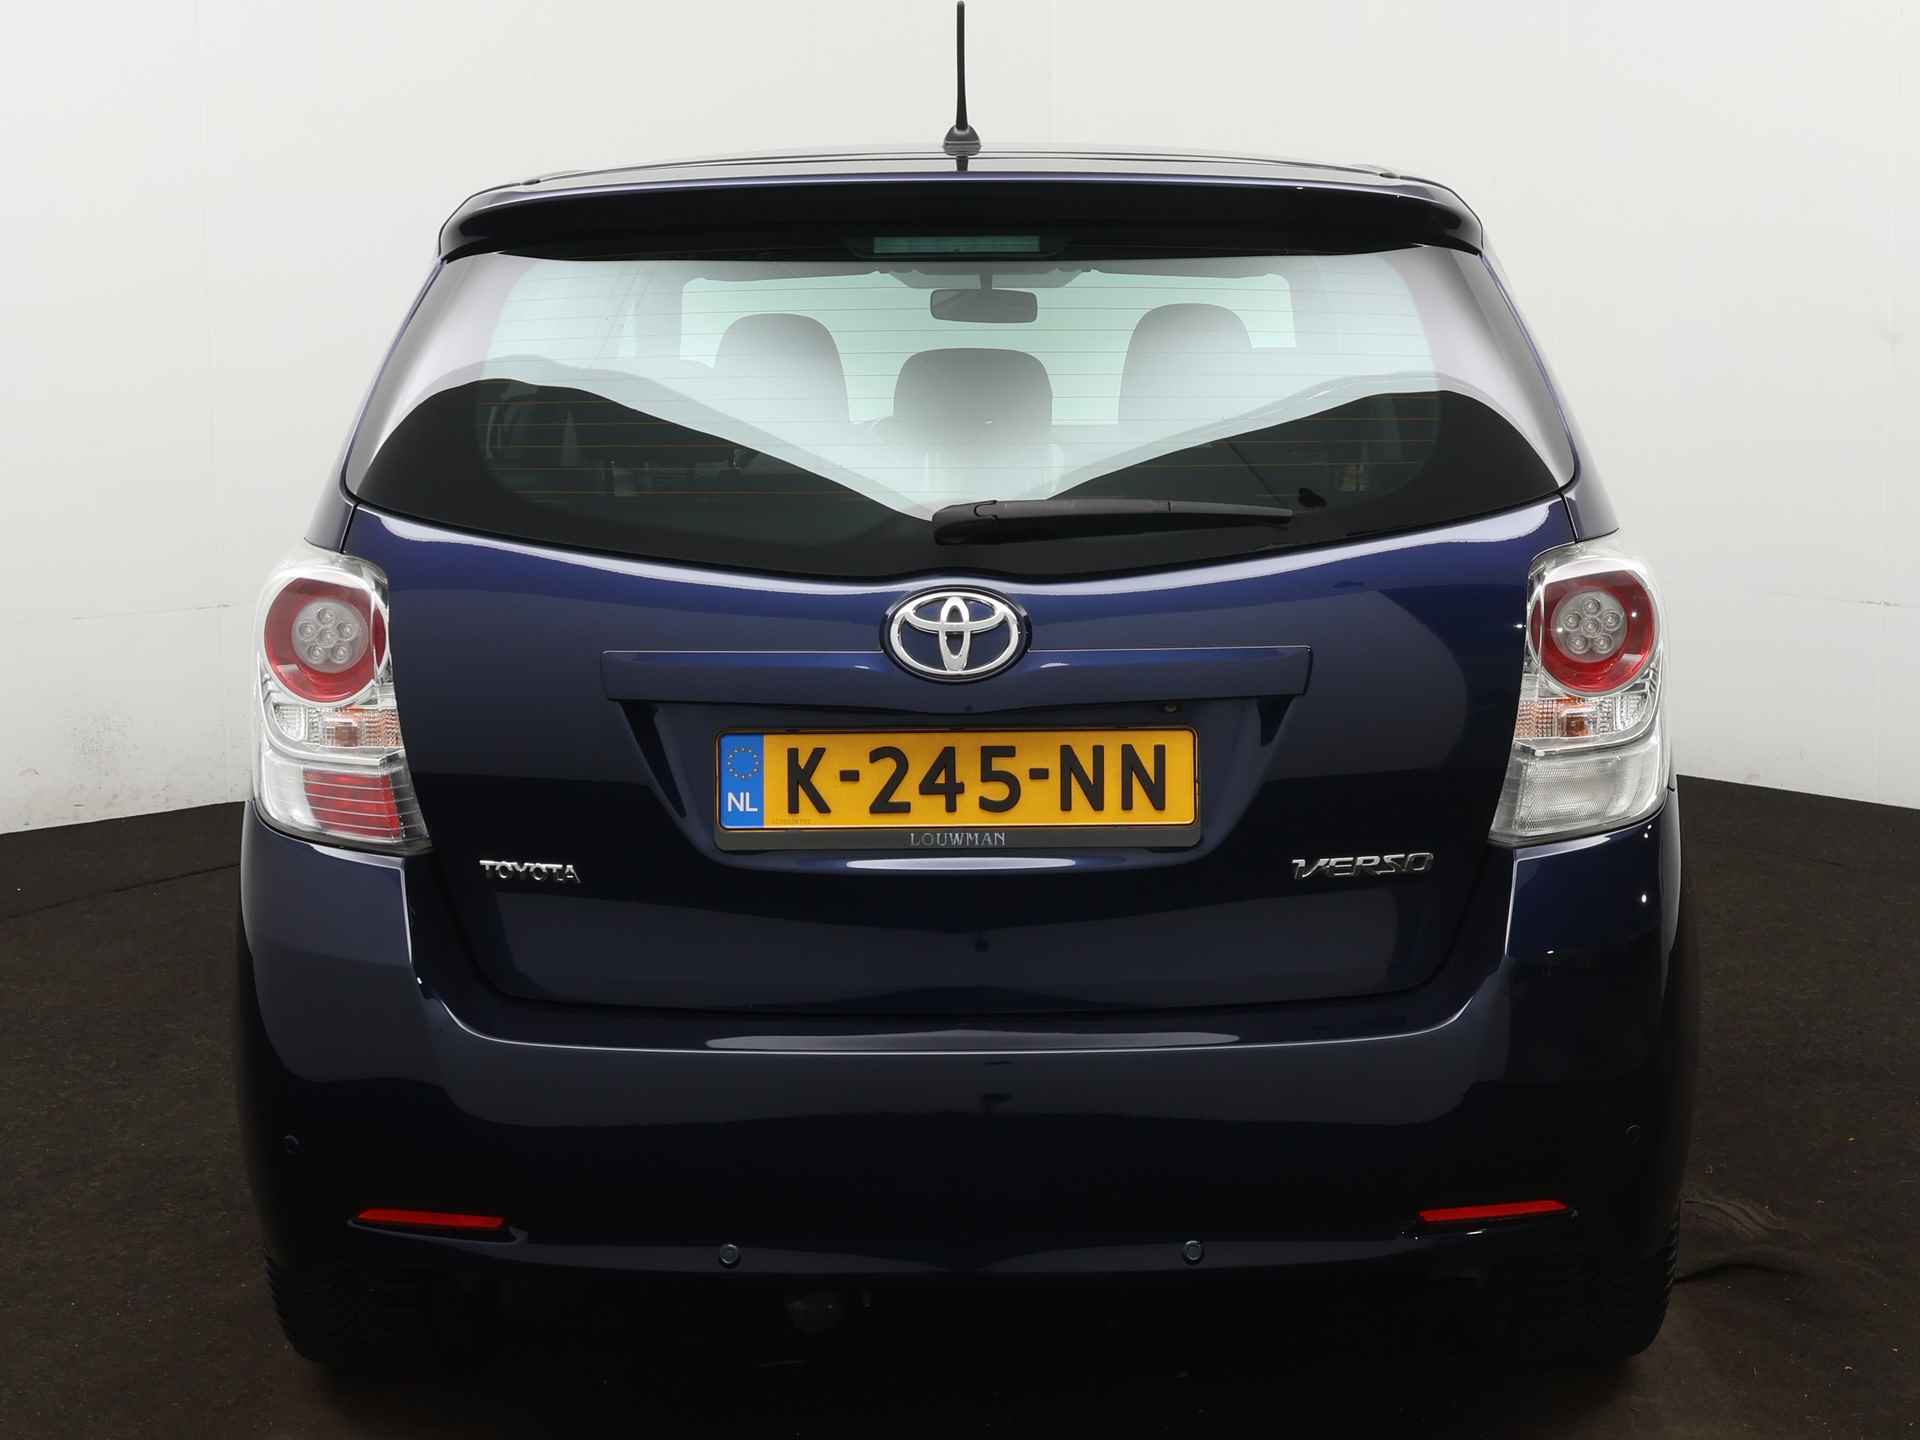 Toyota Verso 1.8 VVT-i Business Limited Automaat | Navigatie | Cruise Control | - 22/31